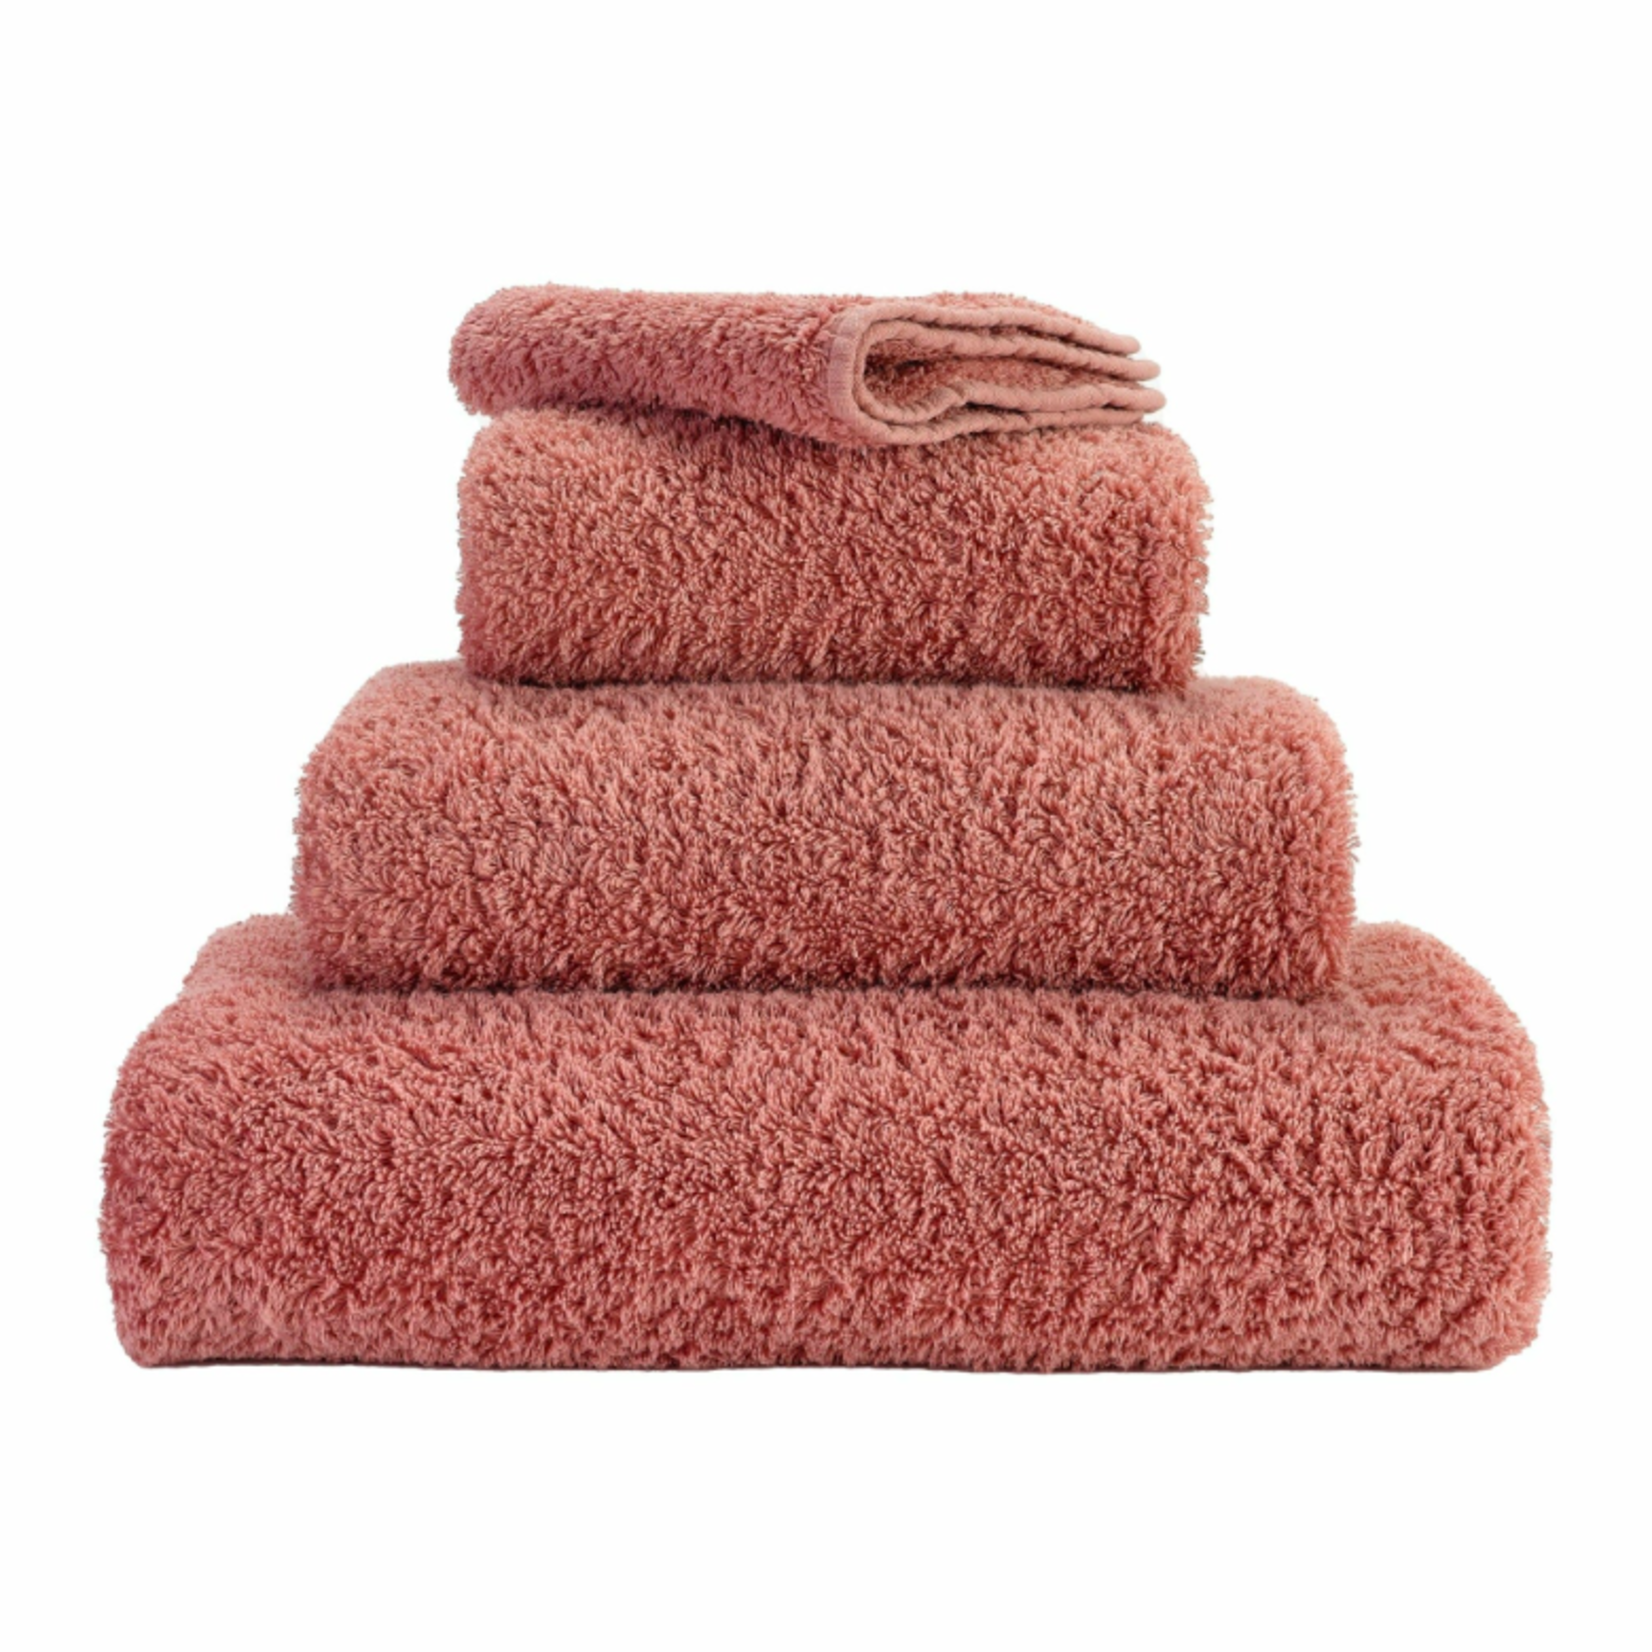 Abyss Abyss Super Pile Towels 515 Rosette